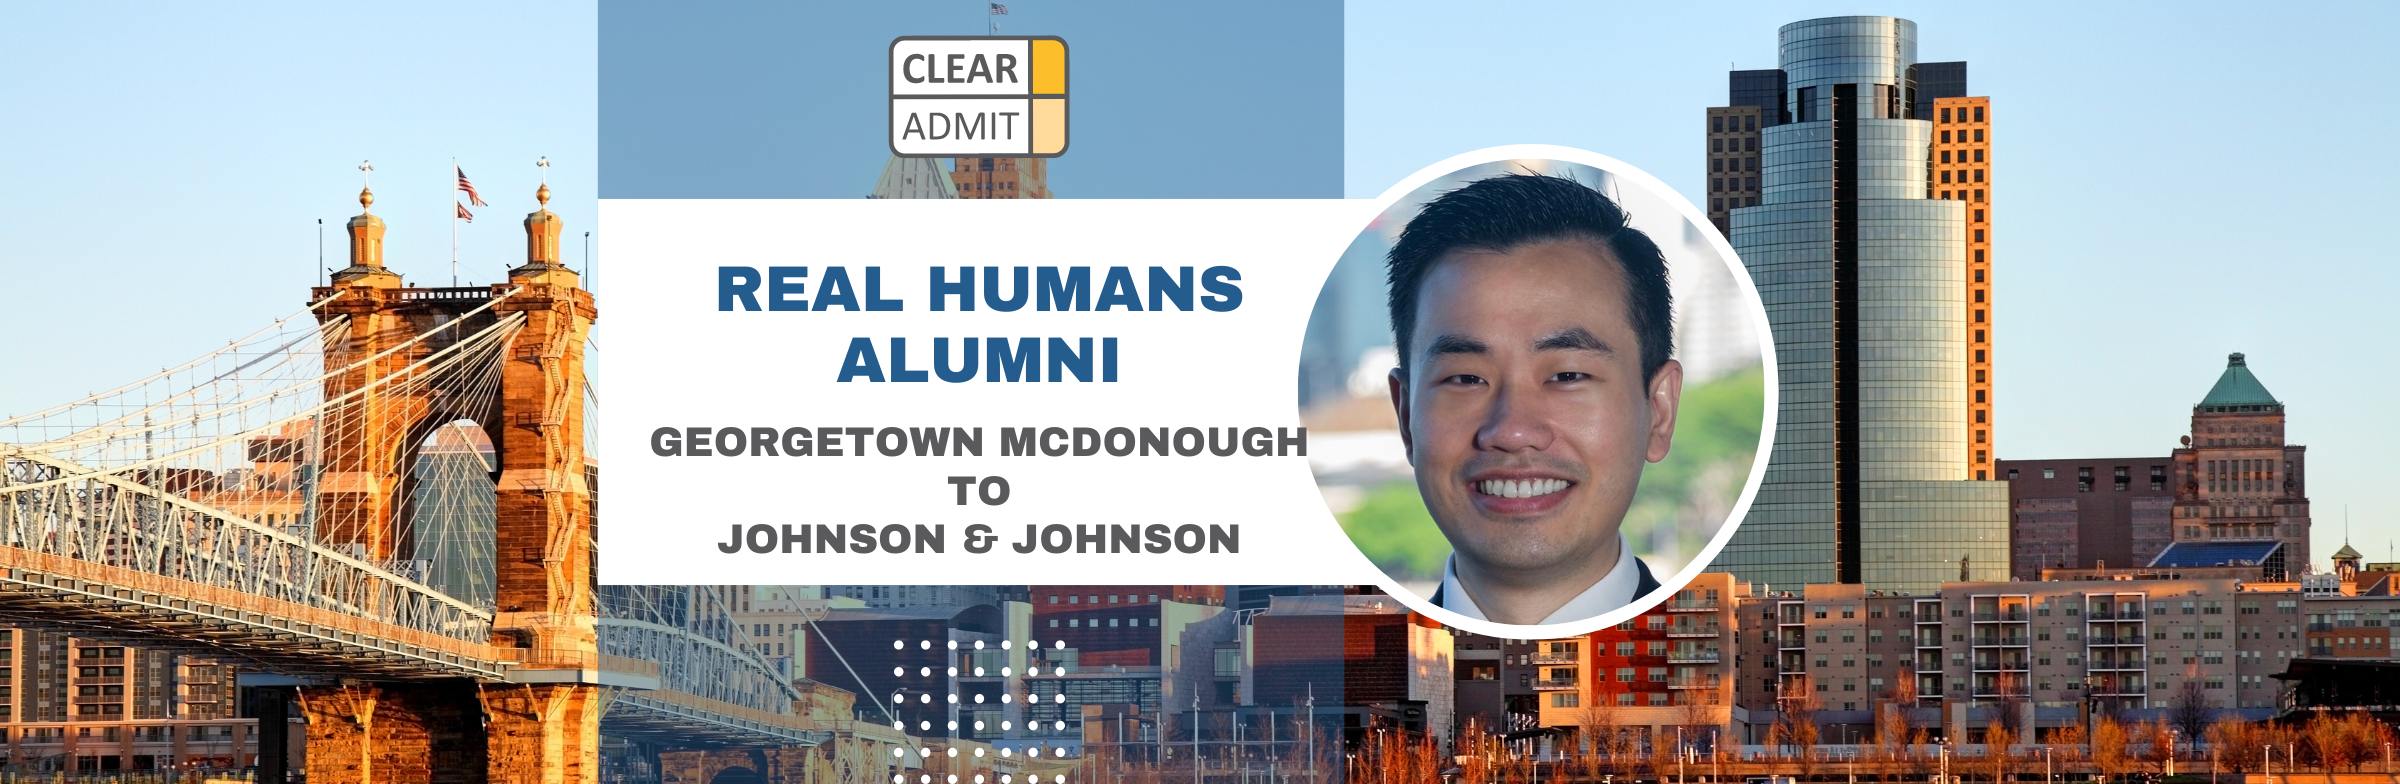 Image for Real Humans of Johnson & Johnson: Edward Yap, Georgetown McDonough MBA ’23, Marketing Manager